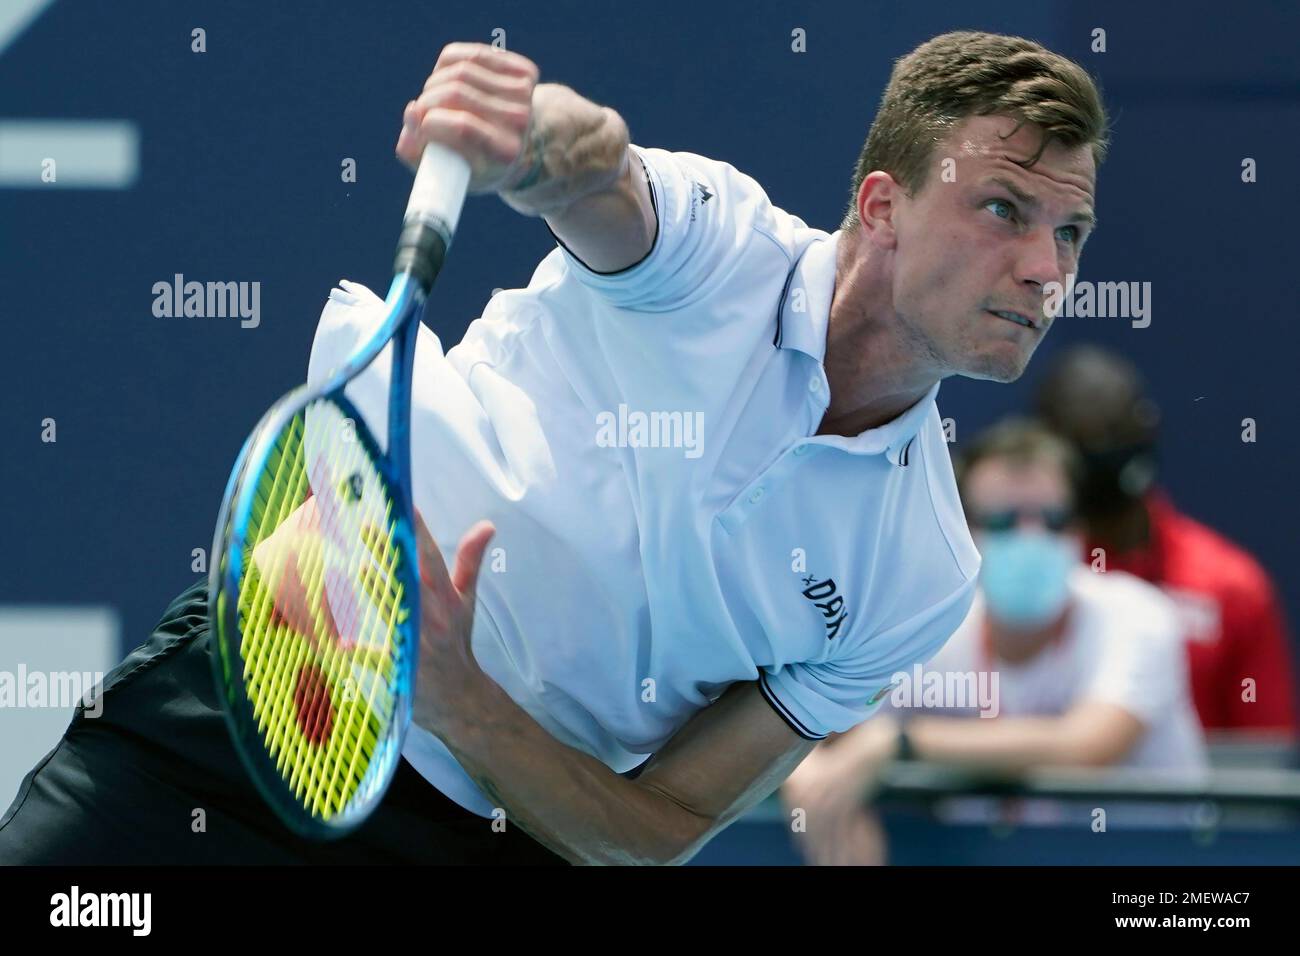 Marton Fucsovics of Hungary, serves against Andrey Rublev of Russia, during  the Miami Open tennis tournament, Monday, March 29, 2021, in Miami Gardens,  Fla. (AP Photo/Marta Lavandier Stock Photo - Alamy